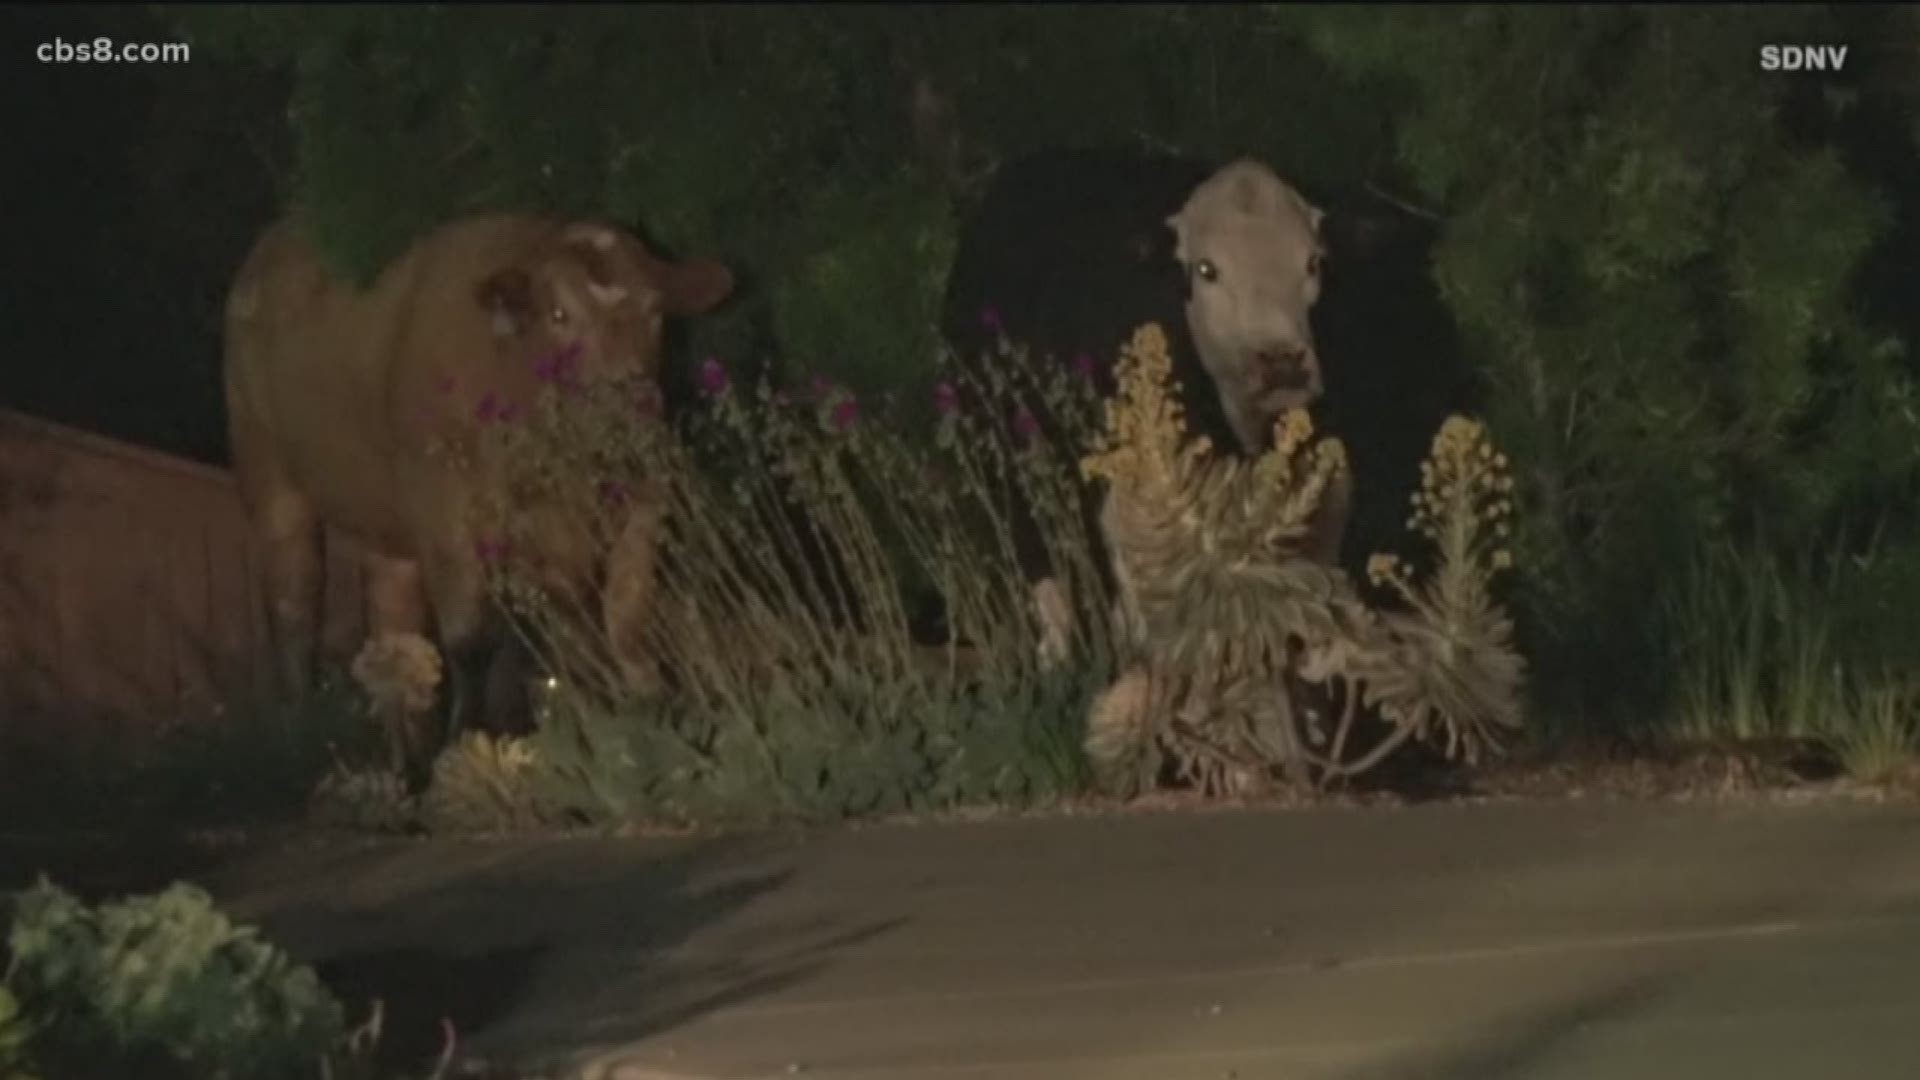 Police located two cows early Sunday morning and observed the creatures standing in a North County San Diego yard munching on plants.